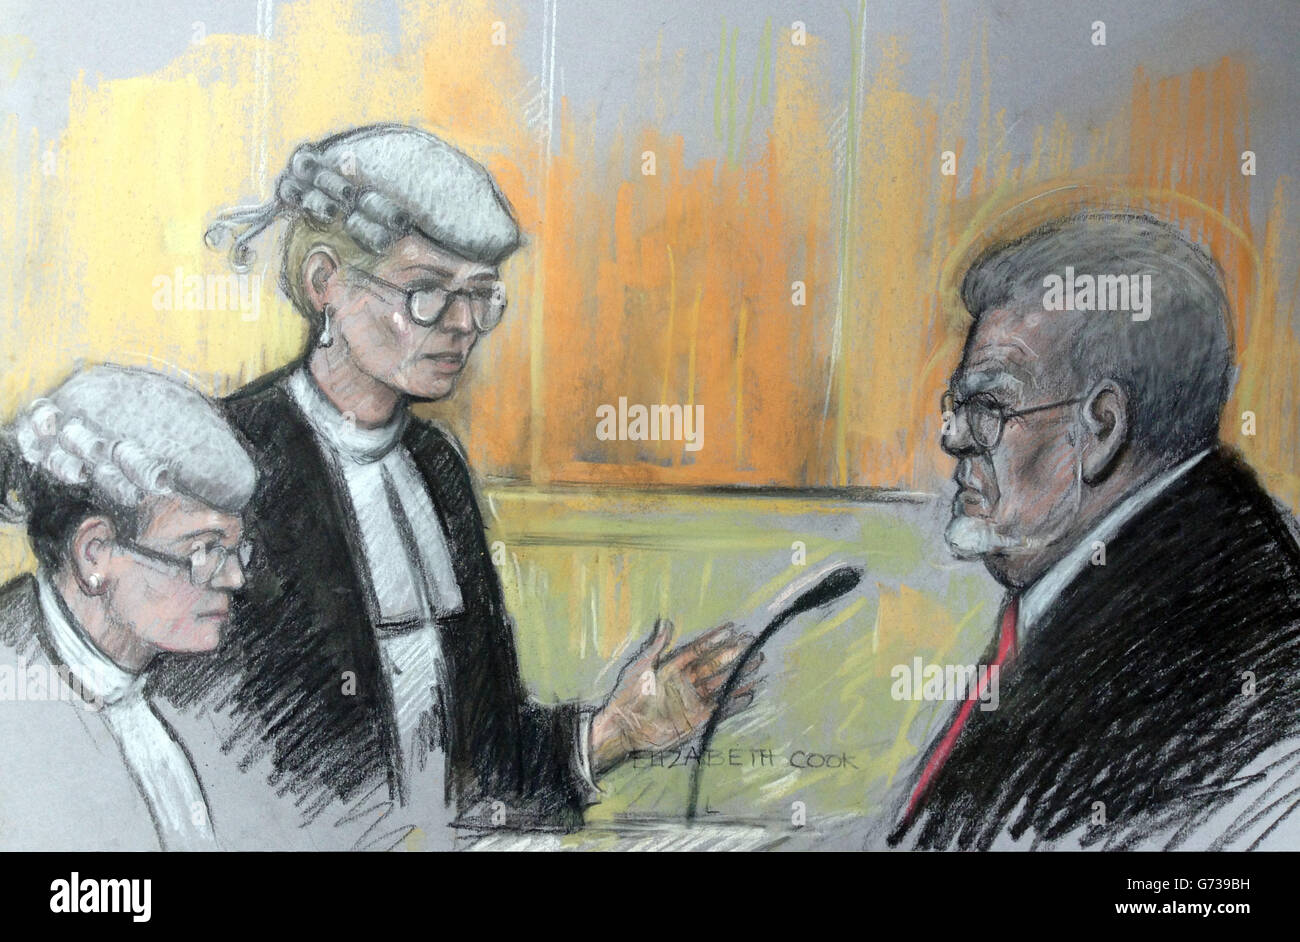 Court artist sketch by Elizabeth Cook of Rolf Harris as he is cross-examined by prosecutor Sasha Wass QC (centre) and watched by junior prosecution council Esther Schutzer-Wessmann at Southwark Crown Court, London where he denies 12 counts of indecent assault between 1968 and 1986. Stock Photo